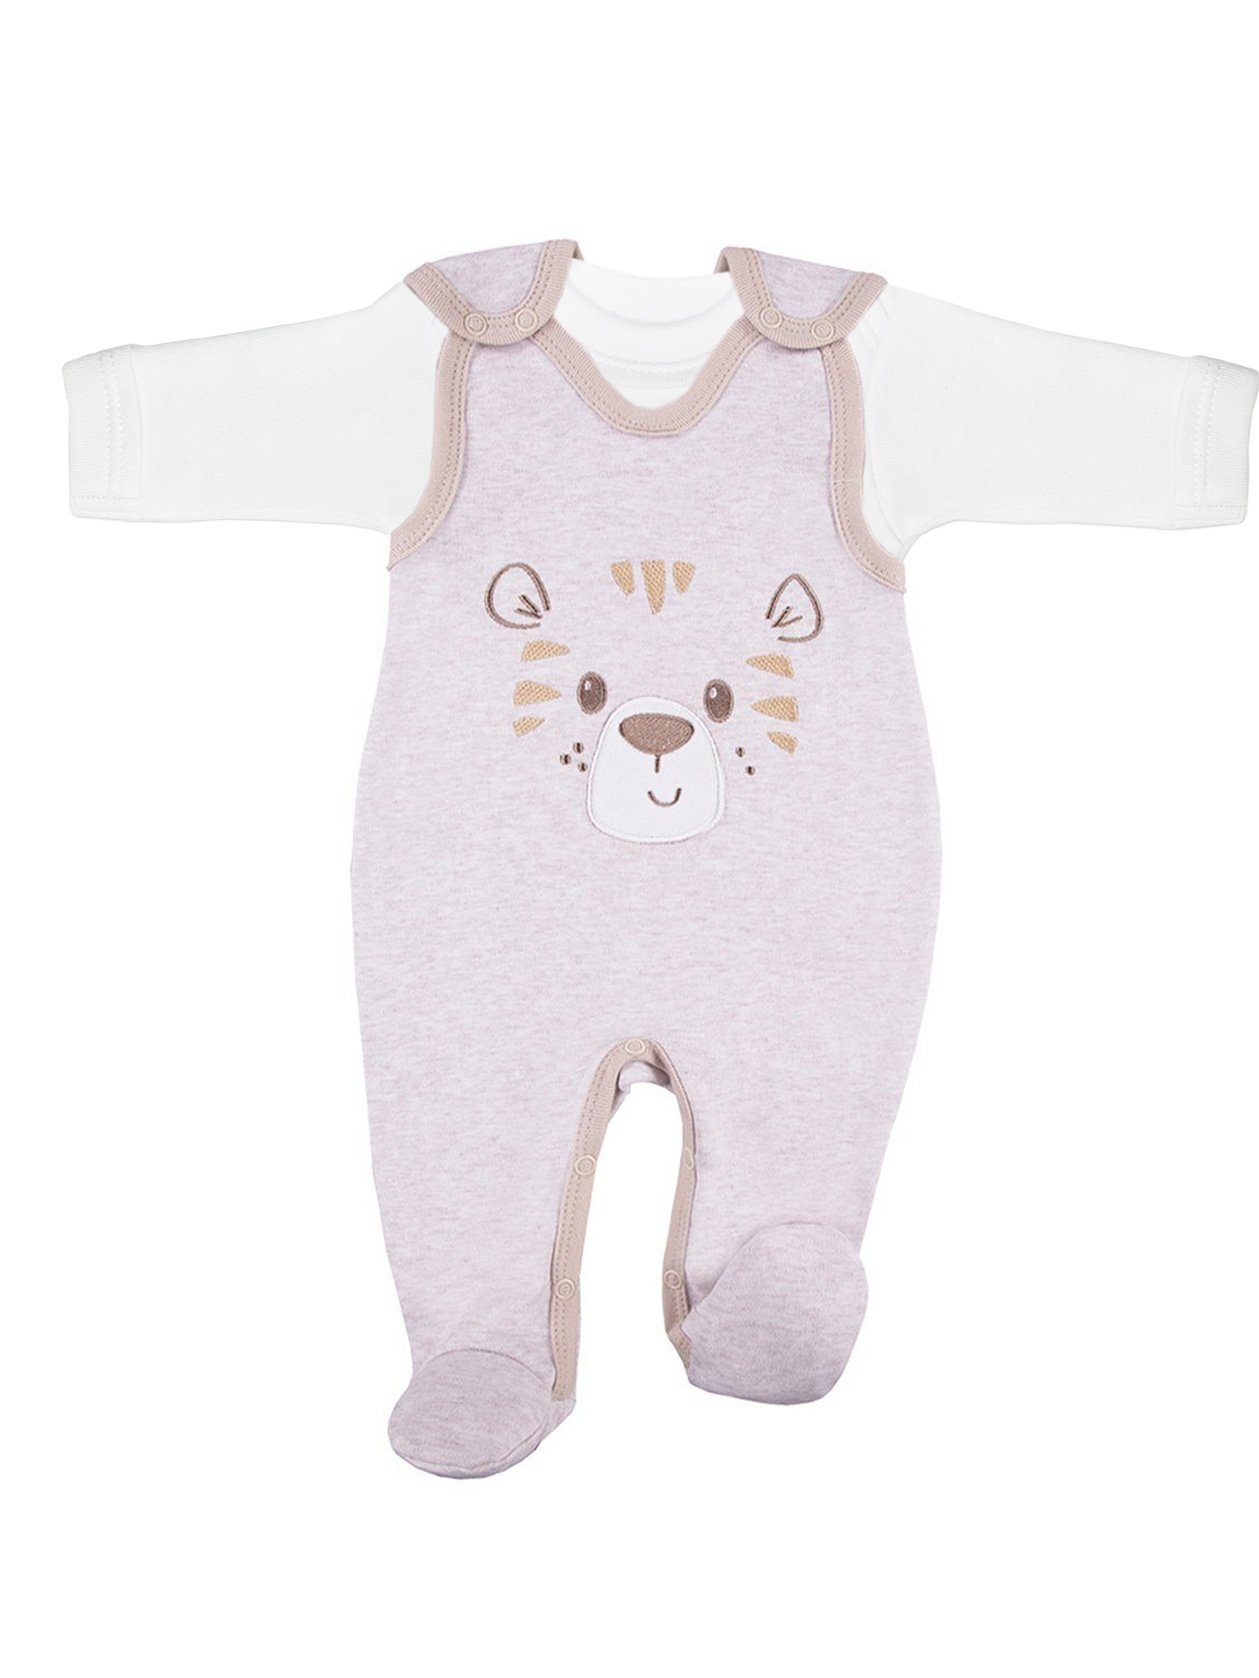 Early Baby Top & Tiger Footed Dungarees Set - Ecru - Dungaree - EEVI